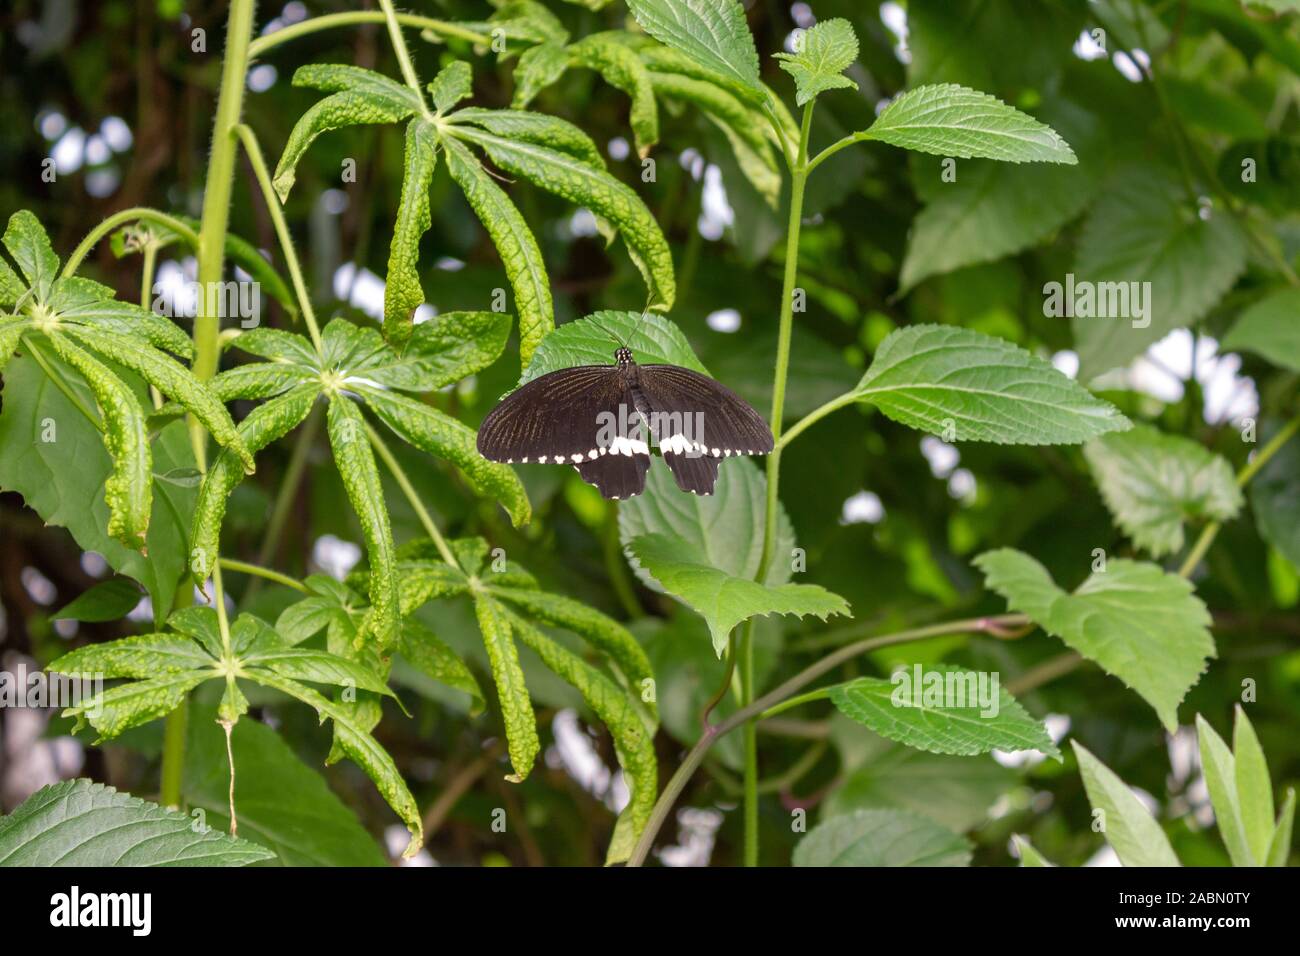 Black Swallowtail Butterfly perched on a leaf. Also known as the American Swallowtail and Parsnip Swallowtail. Tommy Thompson Park, Toronto, Ontario, Stock Photo